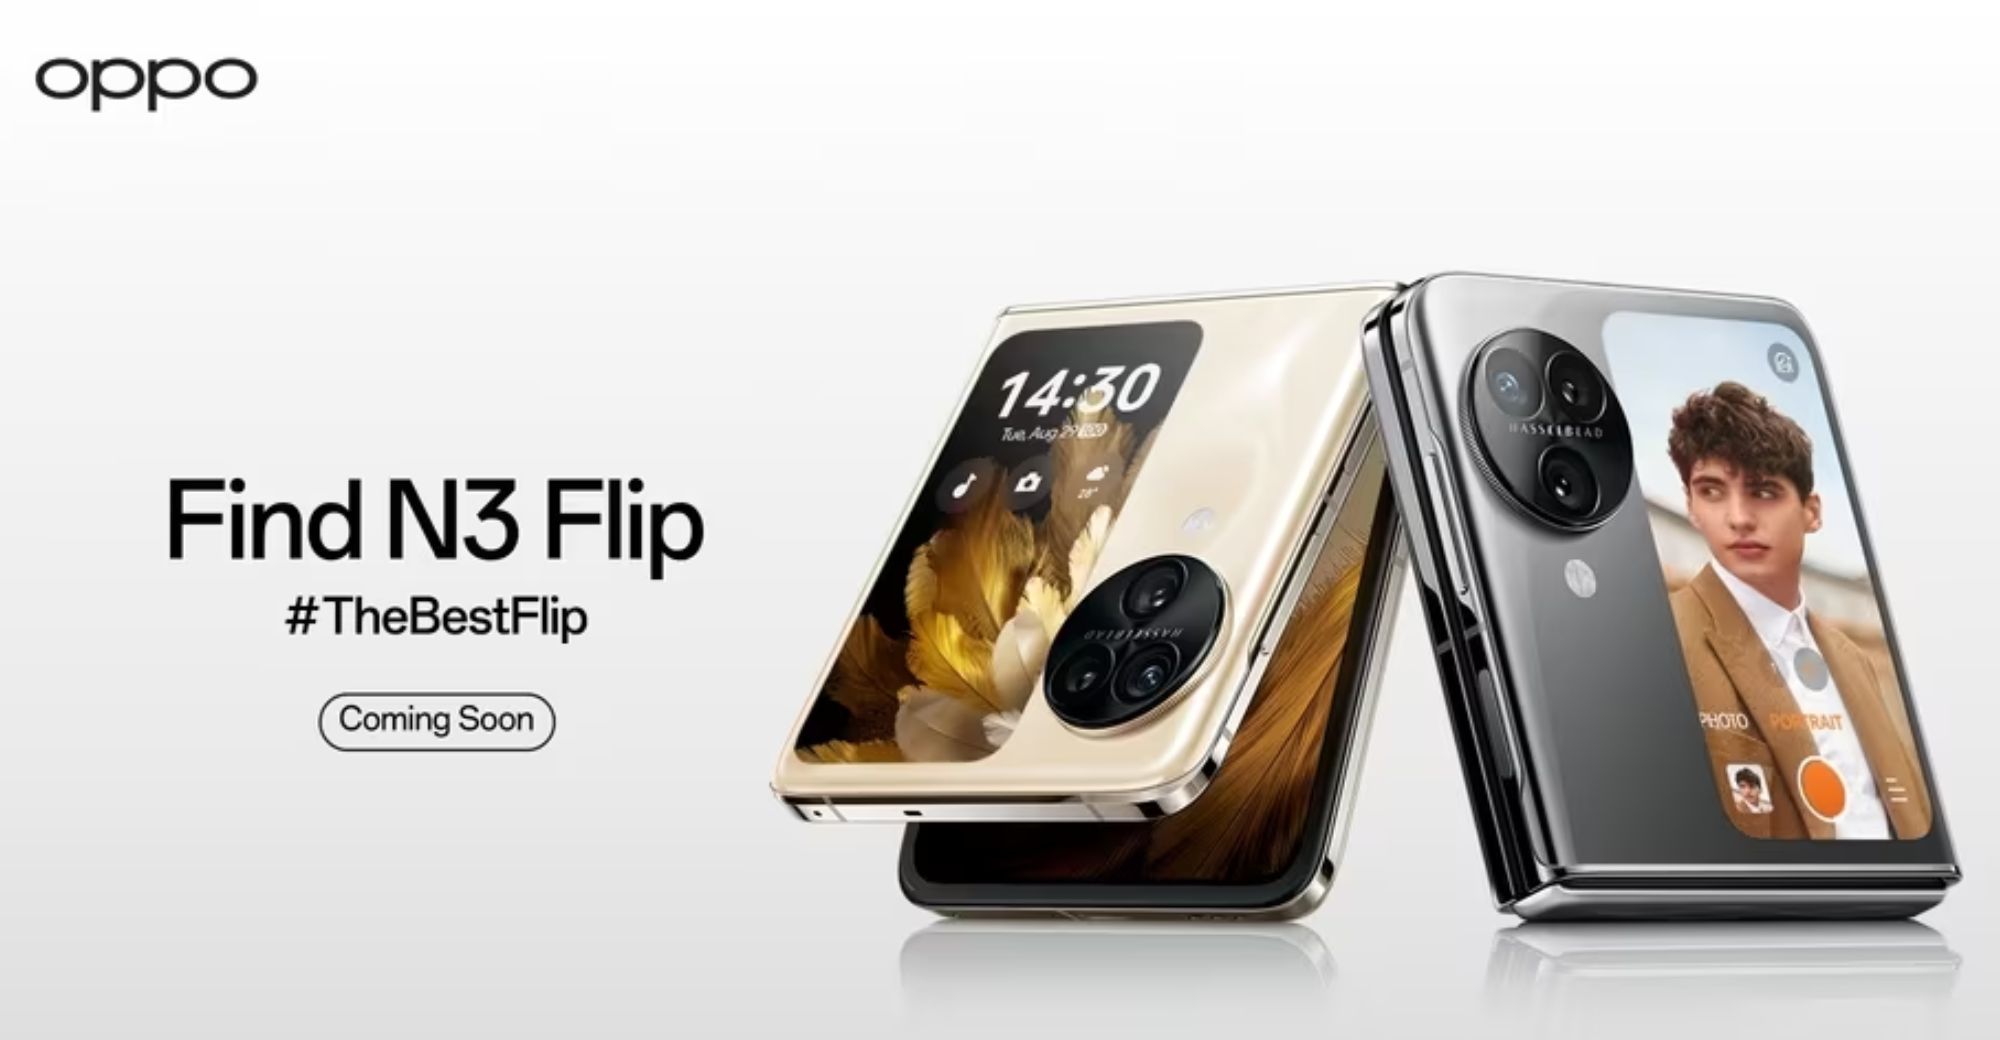 OPPO Find N3 Flip Foldable Phone Will Be Released Globally on October 12th